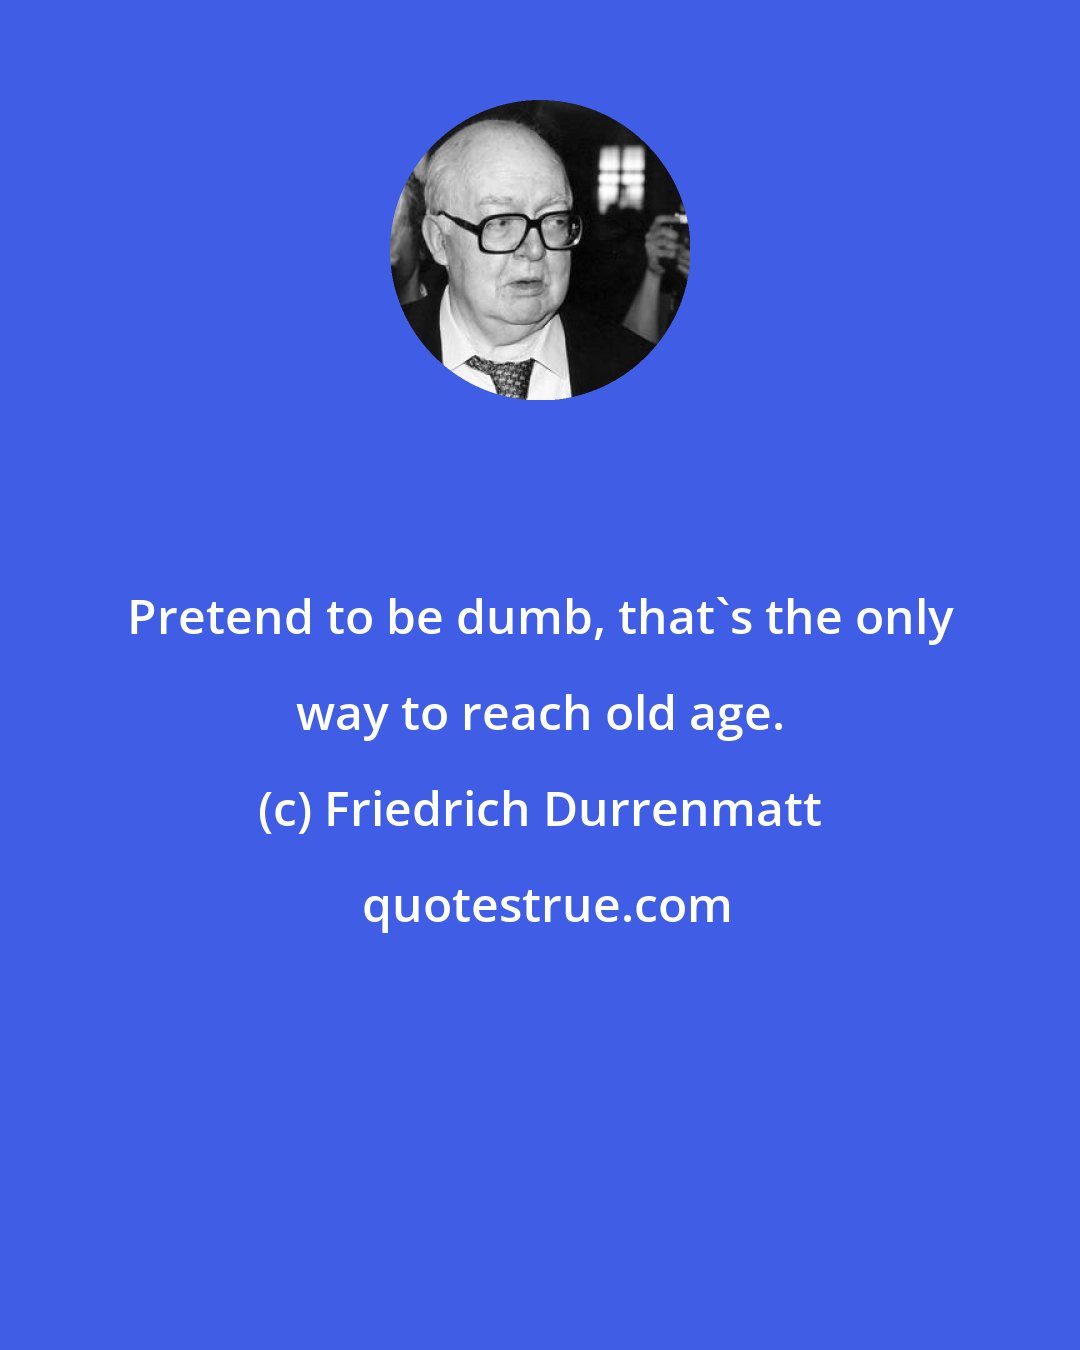 Friedrich Durrenmatt: Pretend to be dumb, that's the only way to reach old age.